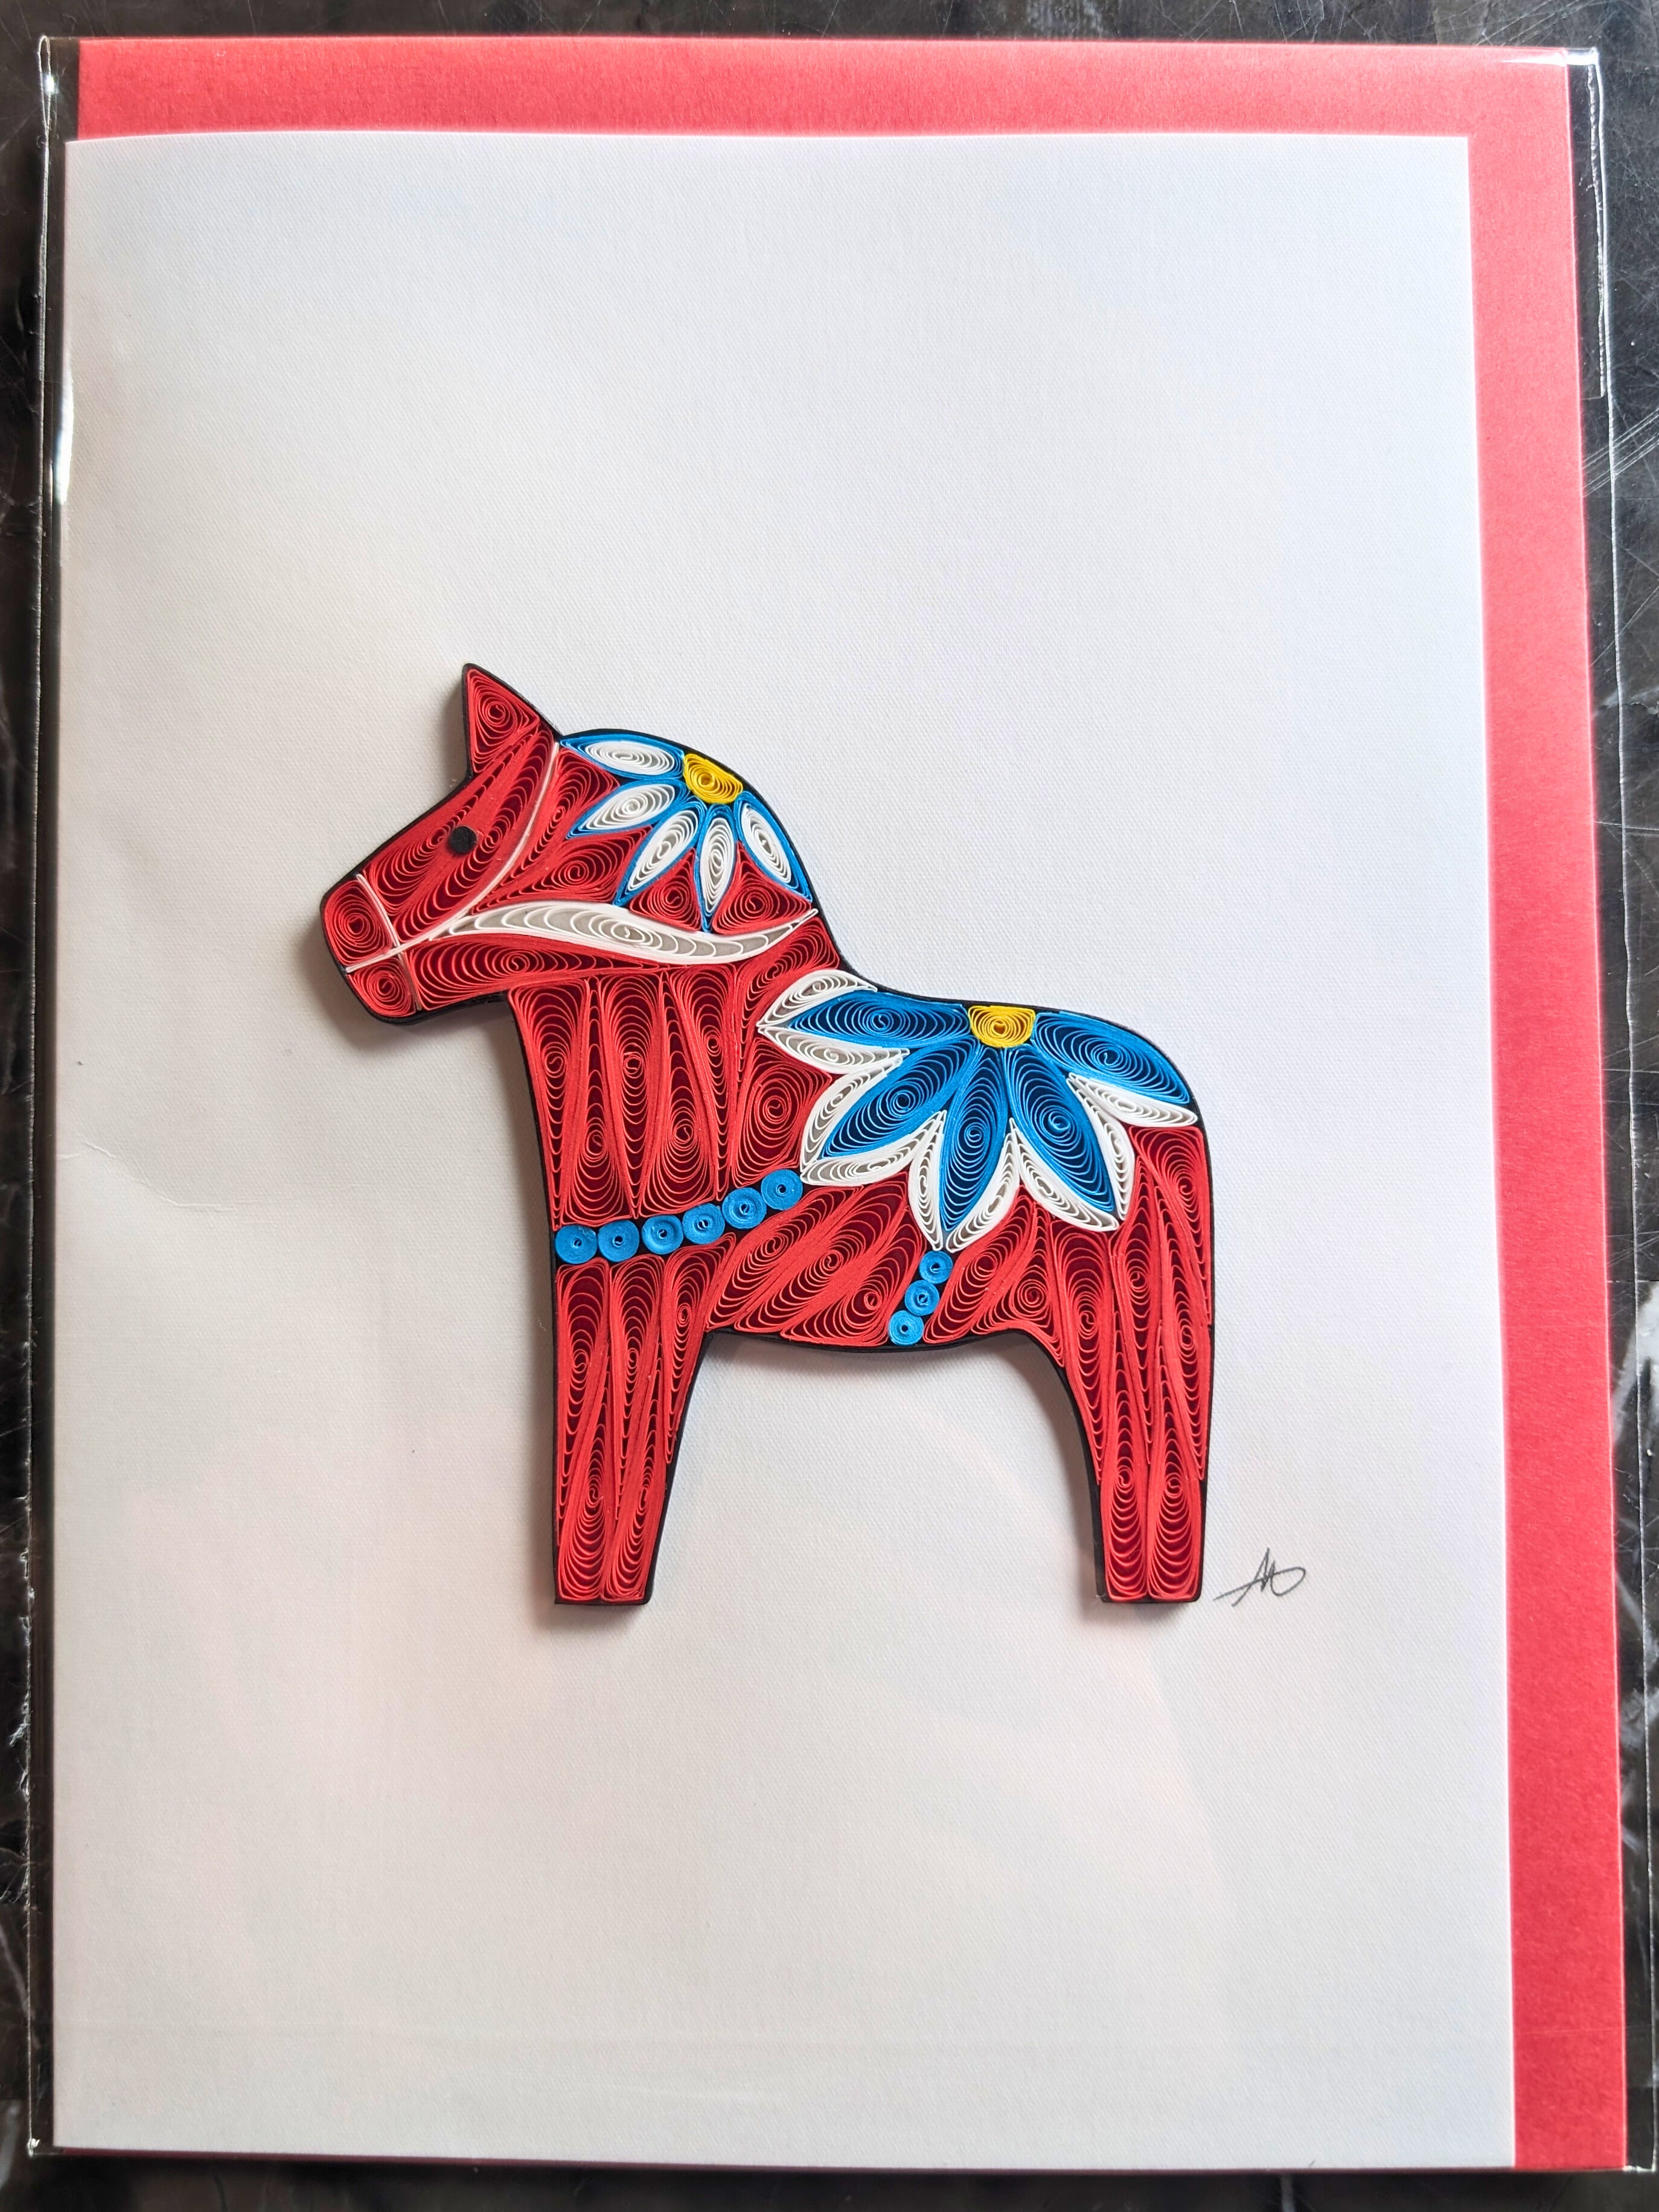 Timeless Greeting Cards: Iconic Quilling at Swedish Gift Store